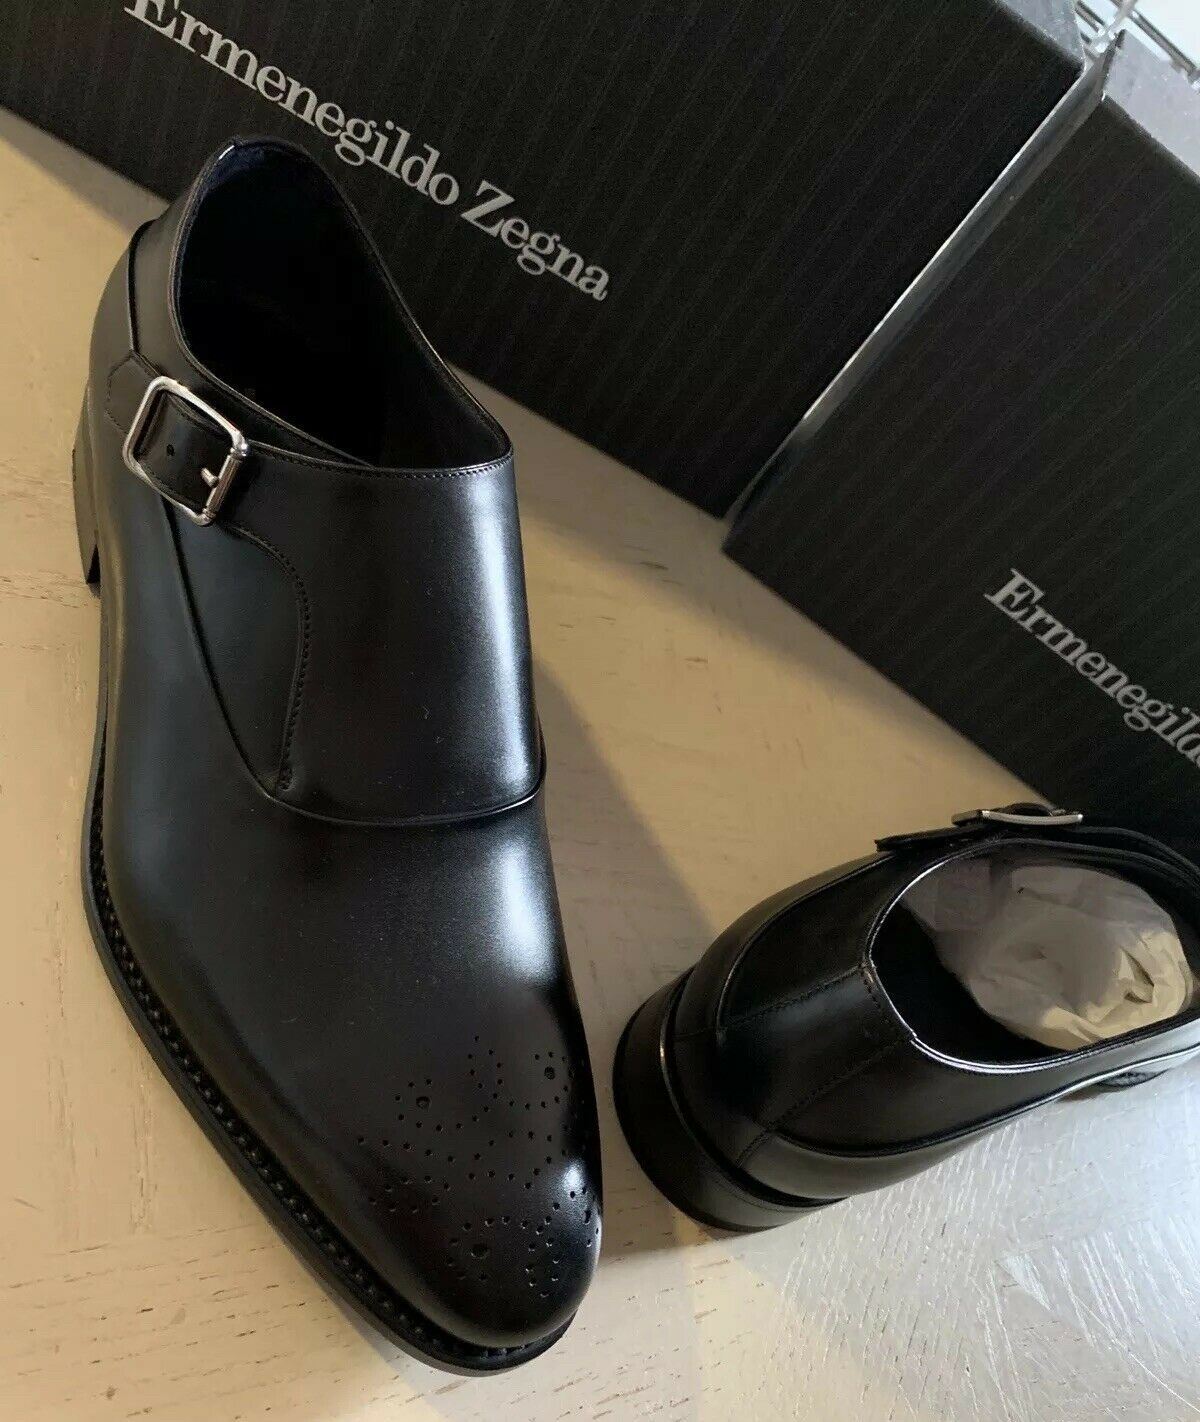 zegna couture shoes